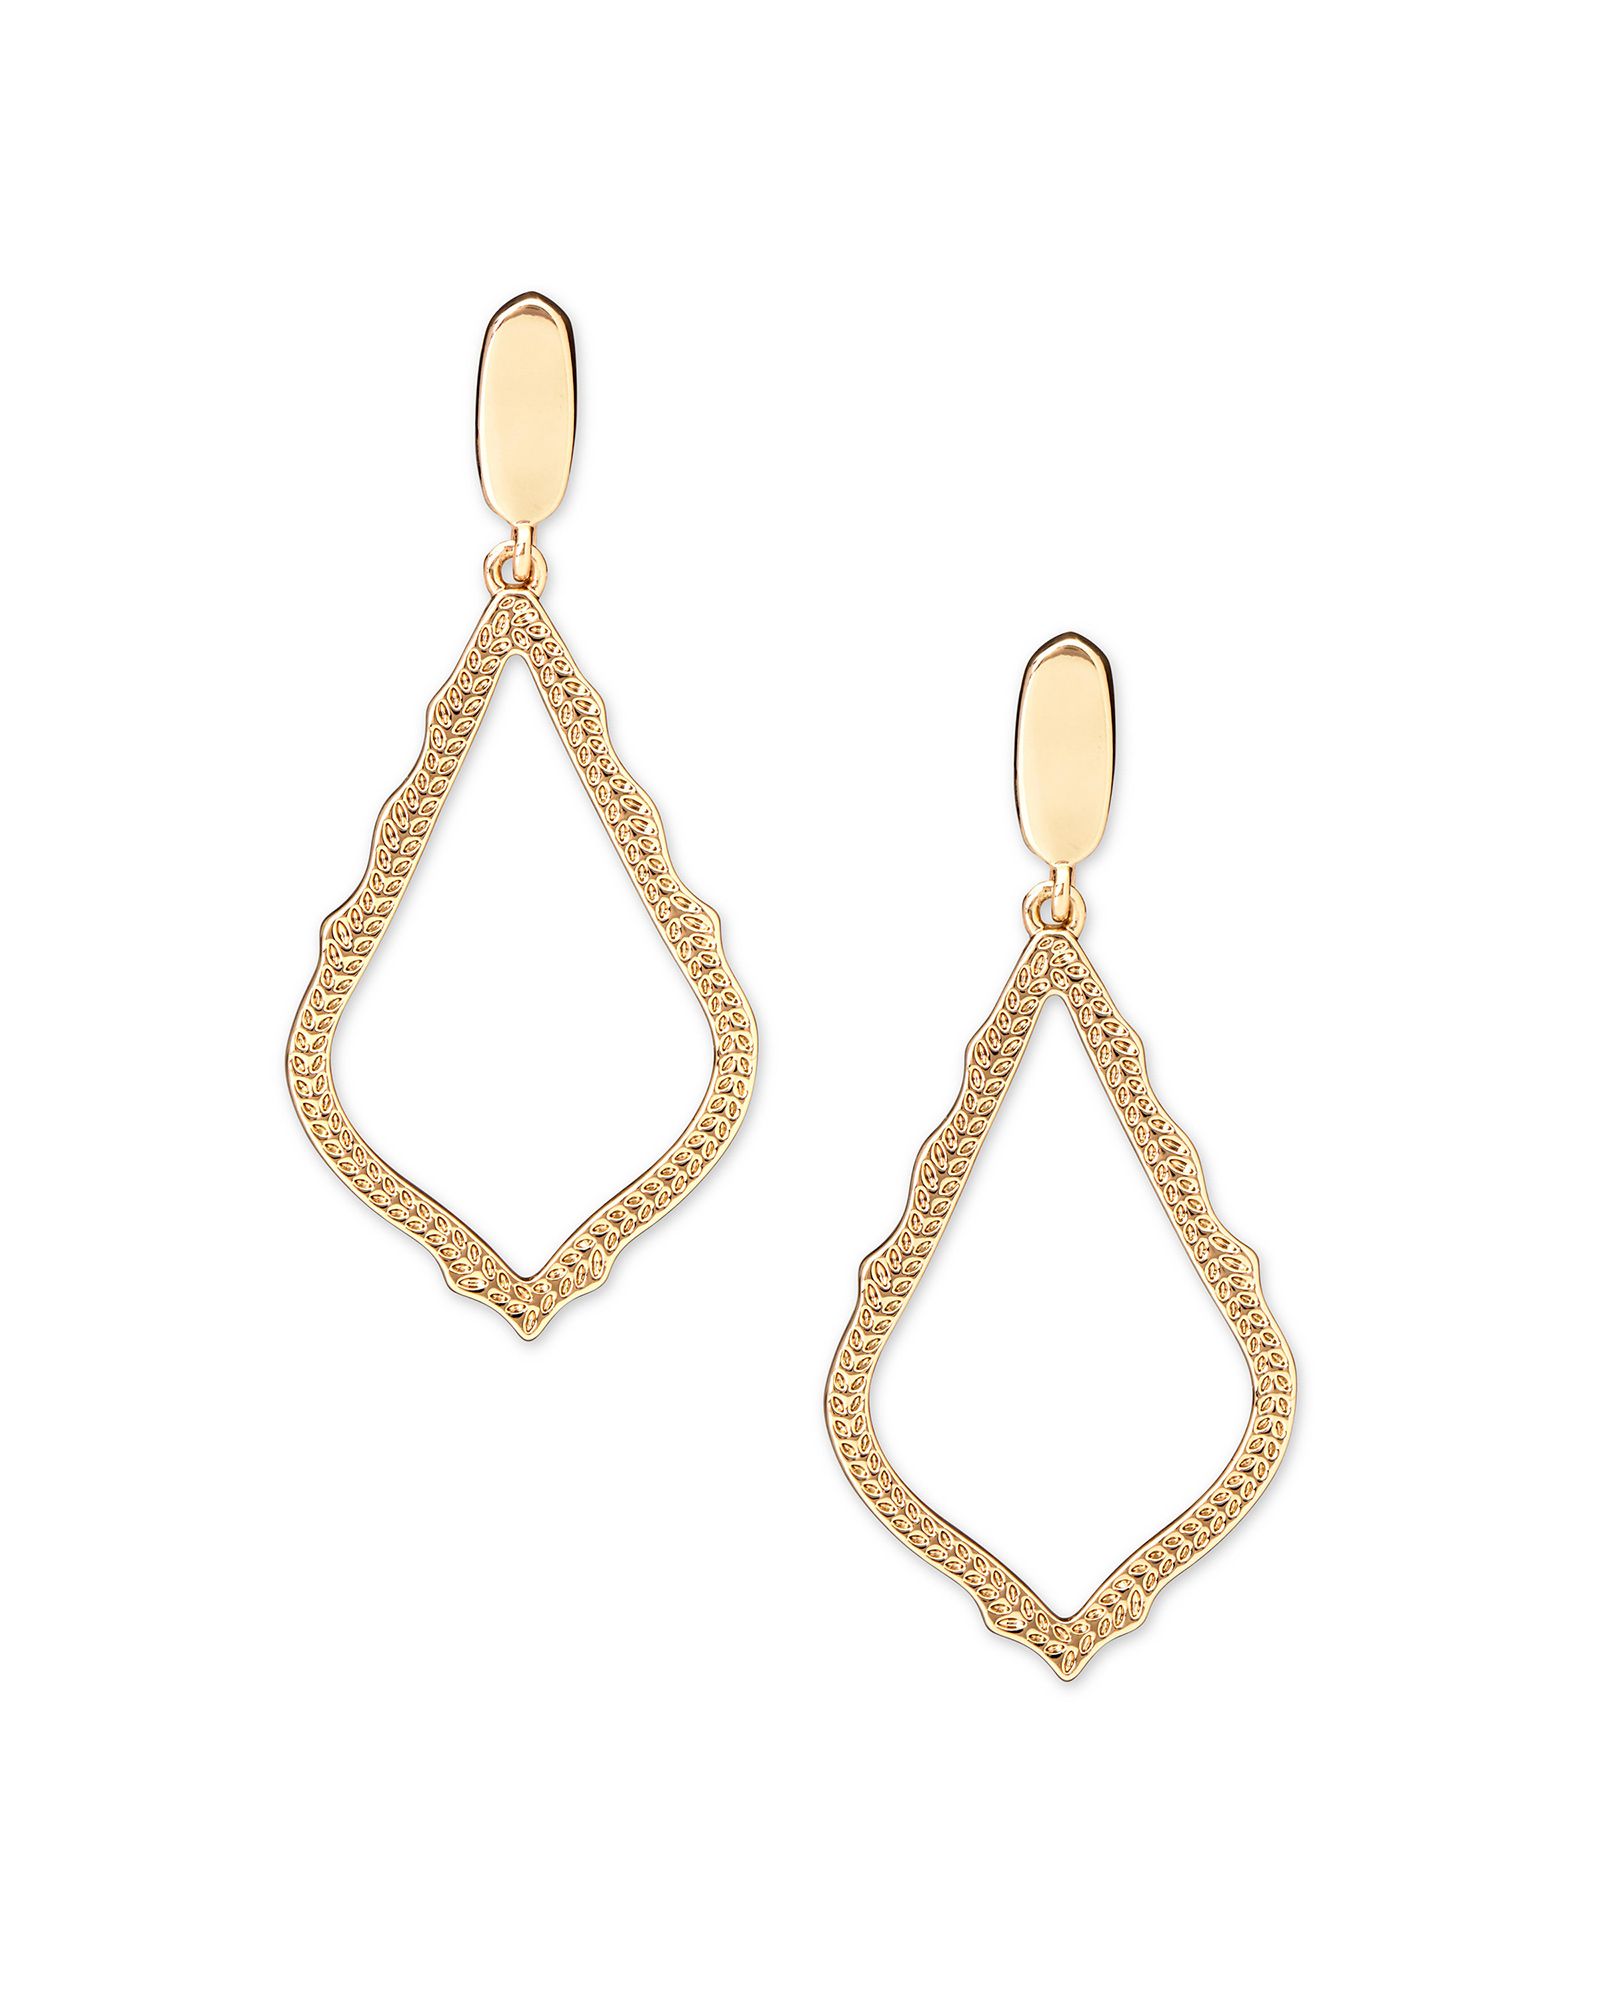 KENDRA SCOTT SOPHIA COLLECTION GOLD PLATED CLIP ON EARRINGS